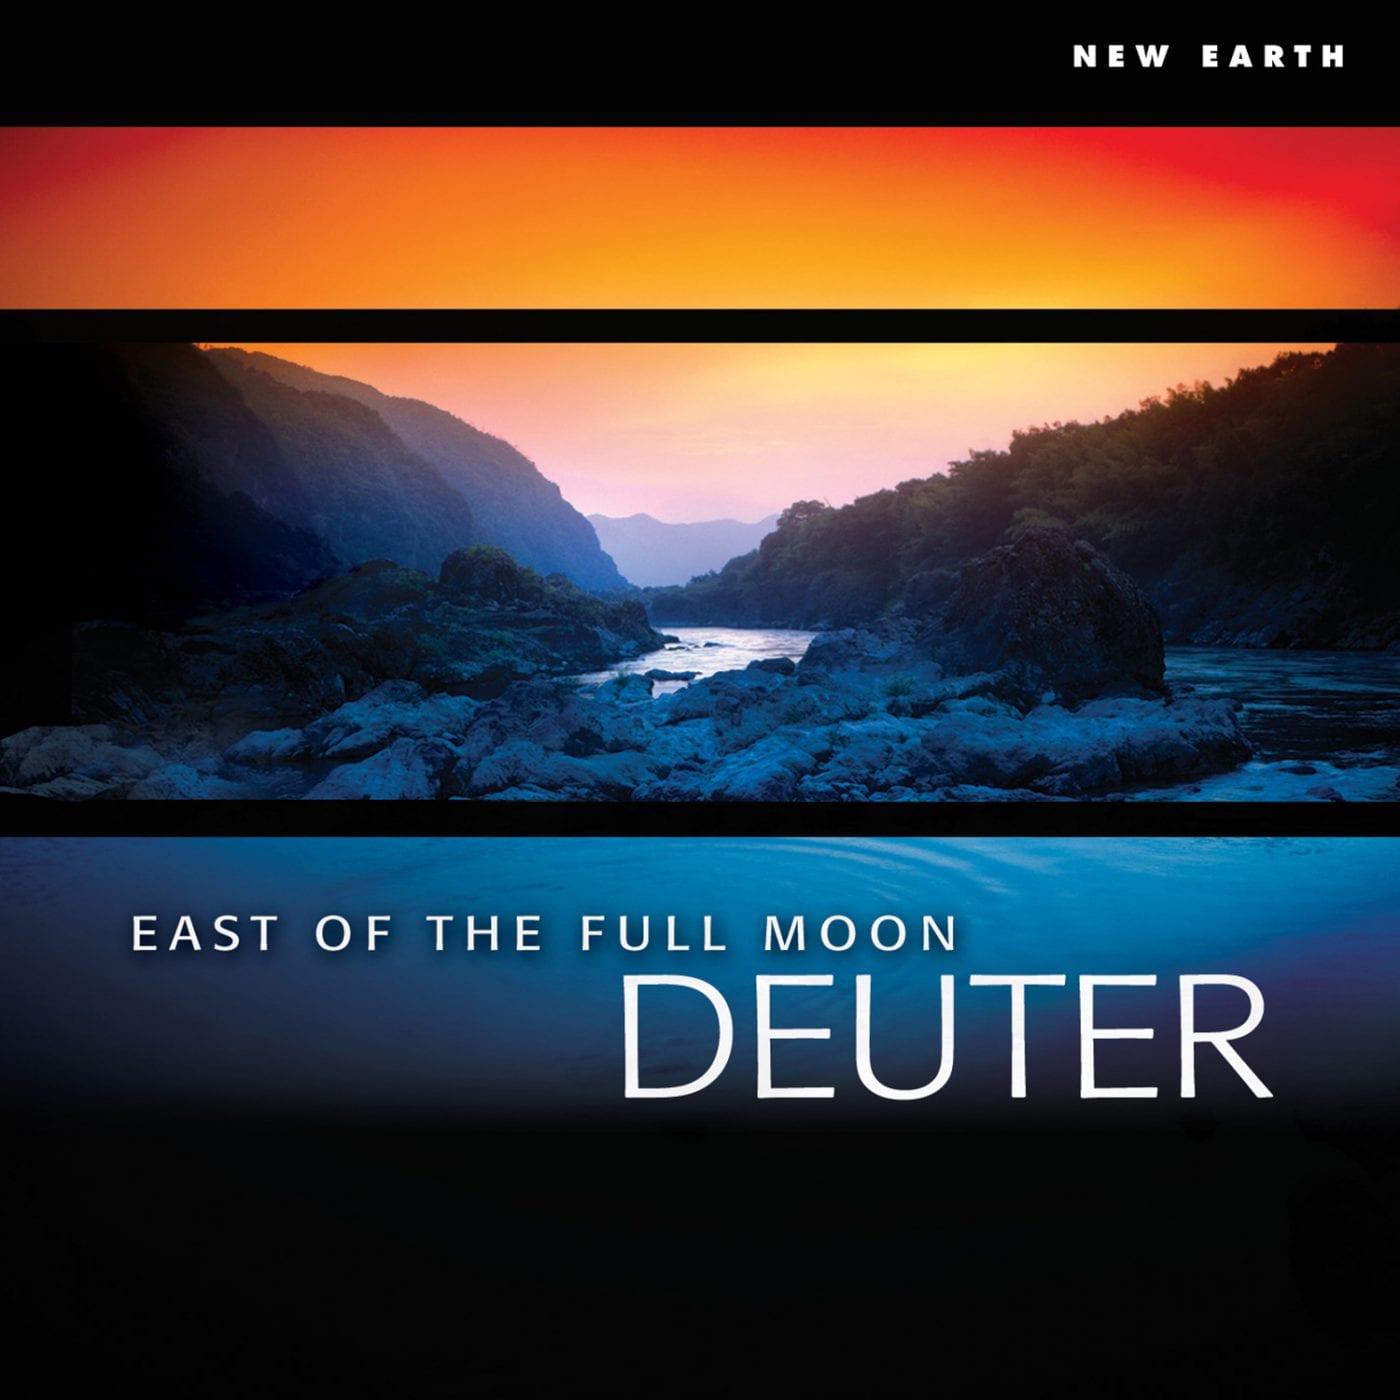 East of the Full Moon